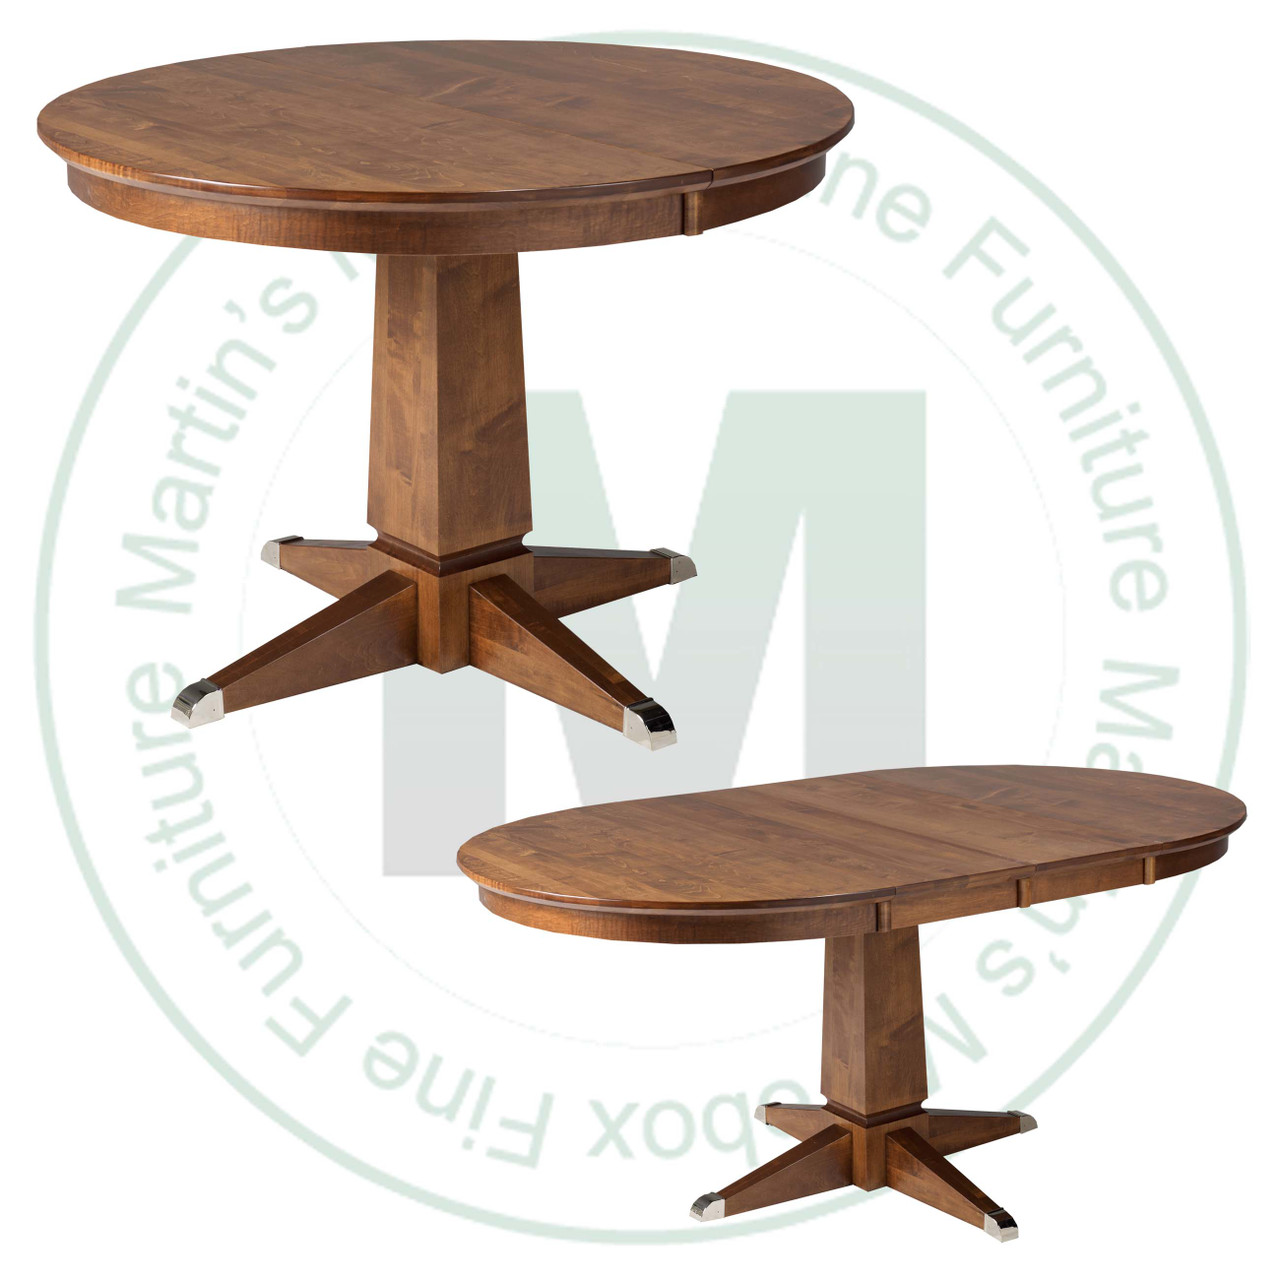 Maple Danish Single Pedestal Table 48''D x 48''W x 30''H With 2 - 12'' Leaves